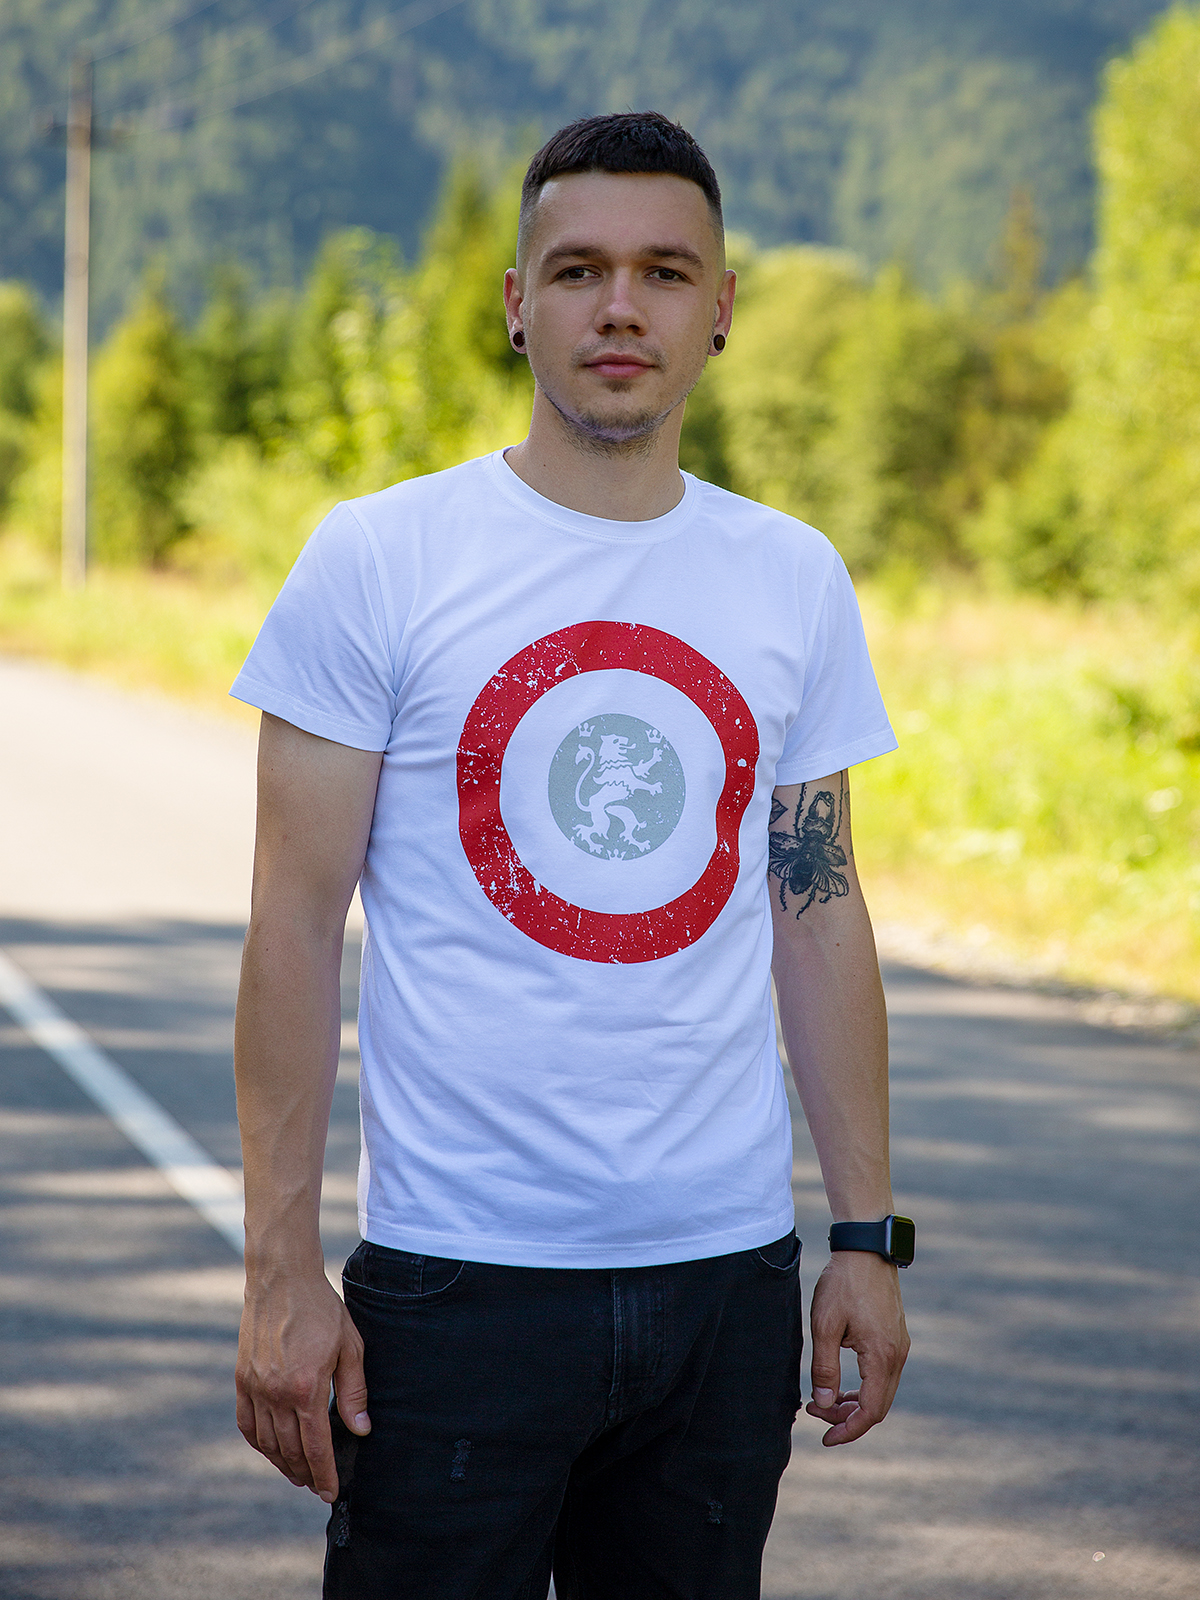 Men's T-Shirt Lion (Roundel). Color white. 
Size worn by the model: М.